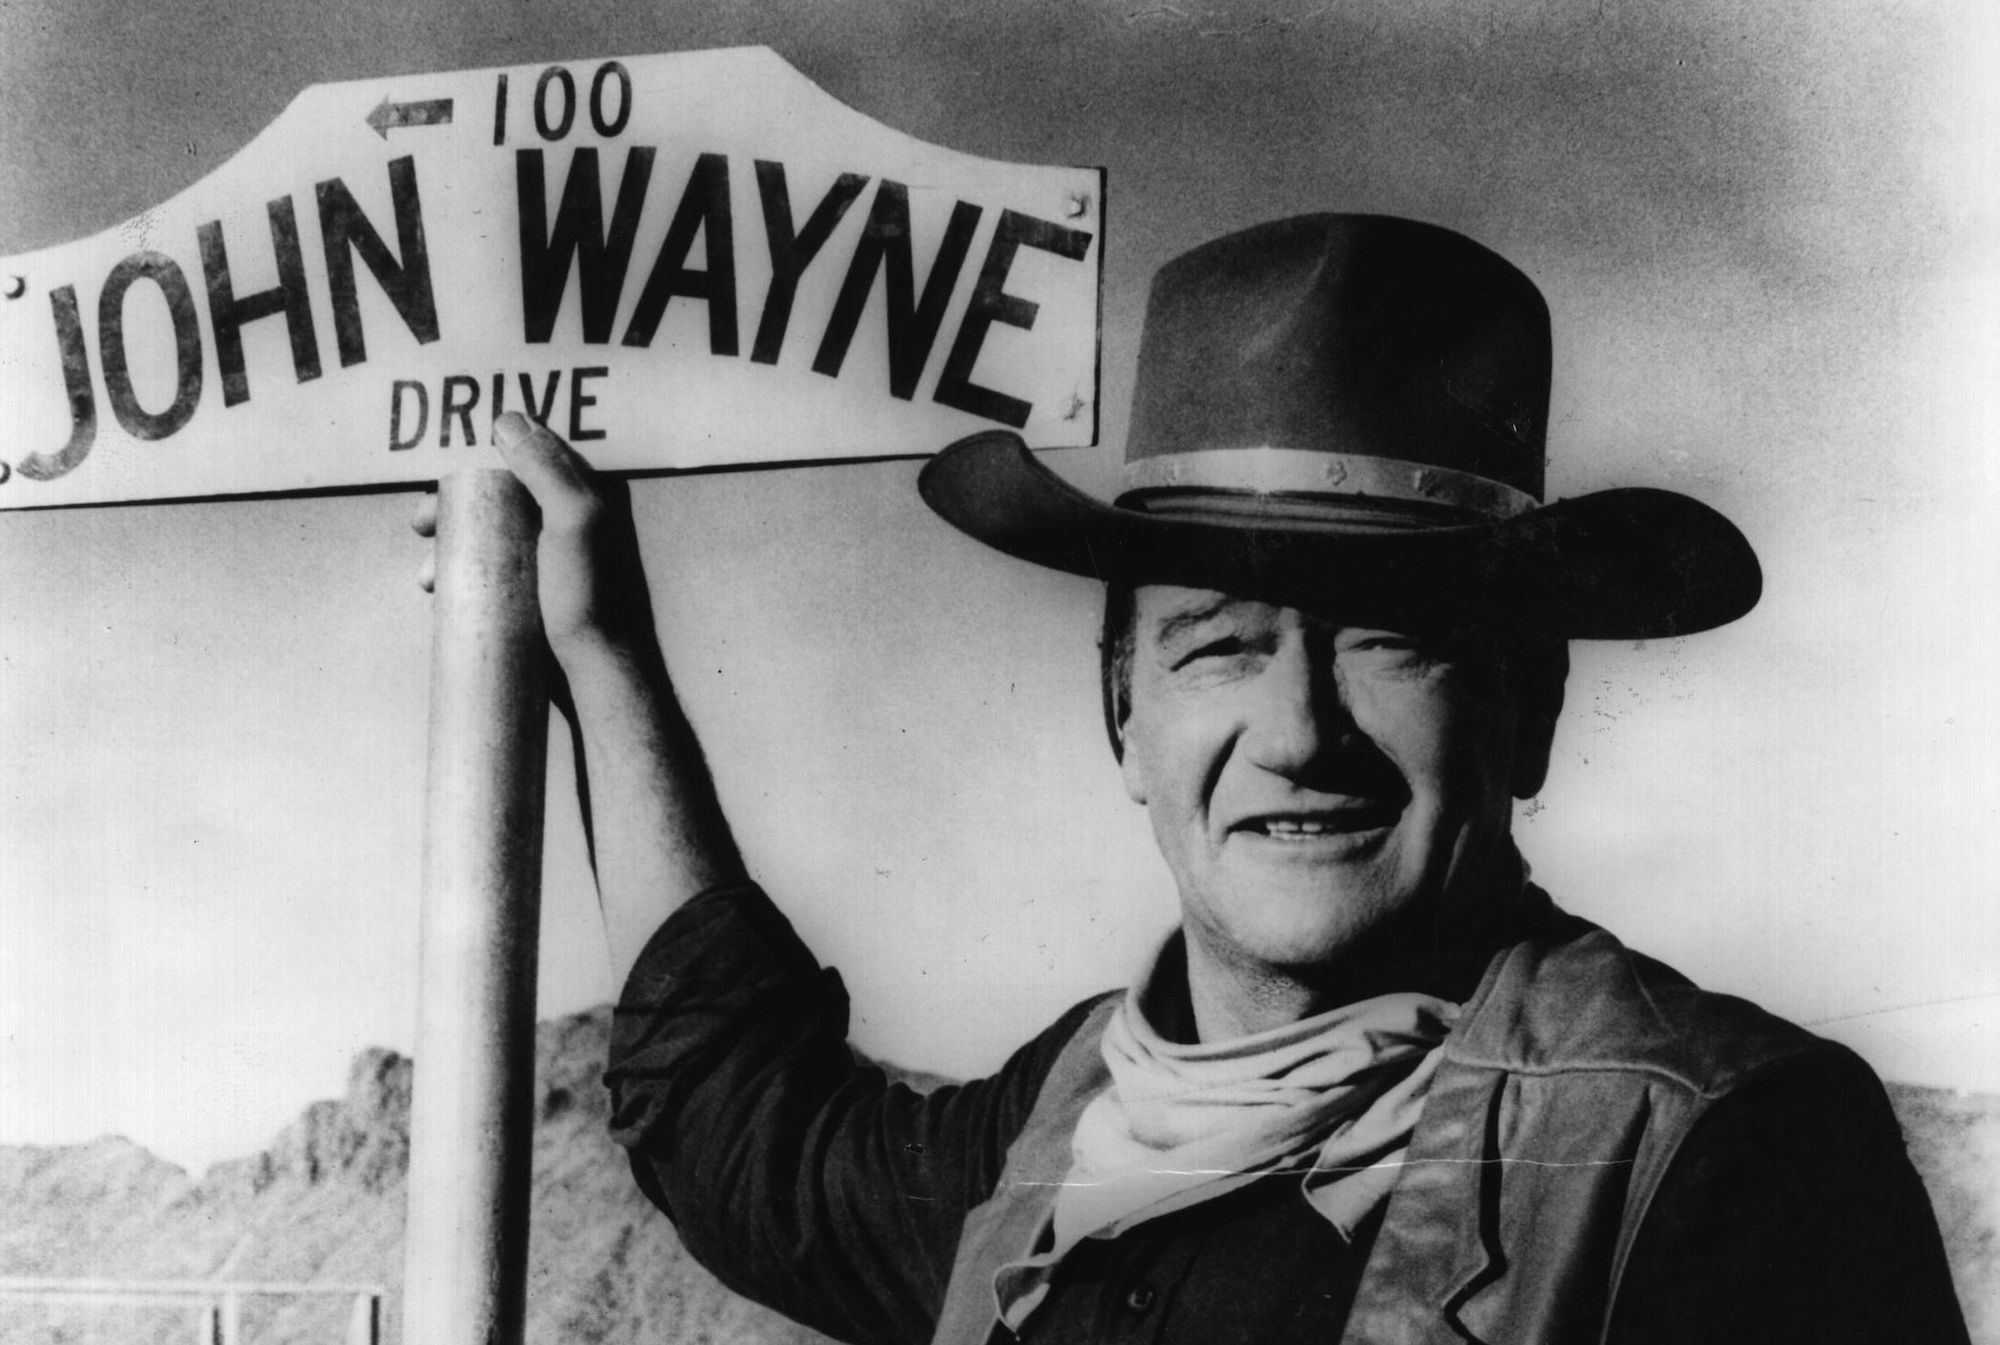 ‘I believe in white supremacy’: John Wayne’s notorious 1971 Playboy interview goes viral on Twitter (2019) | The Washington Post